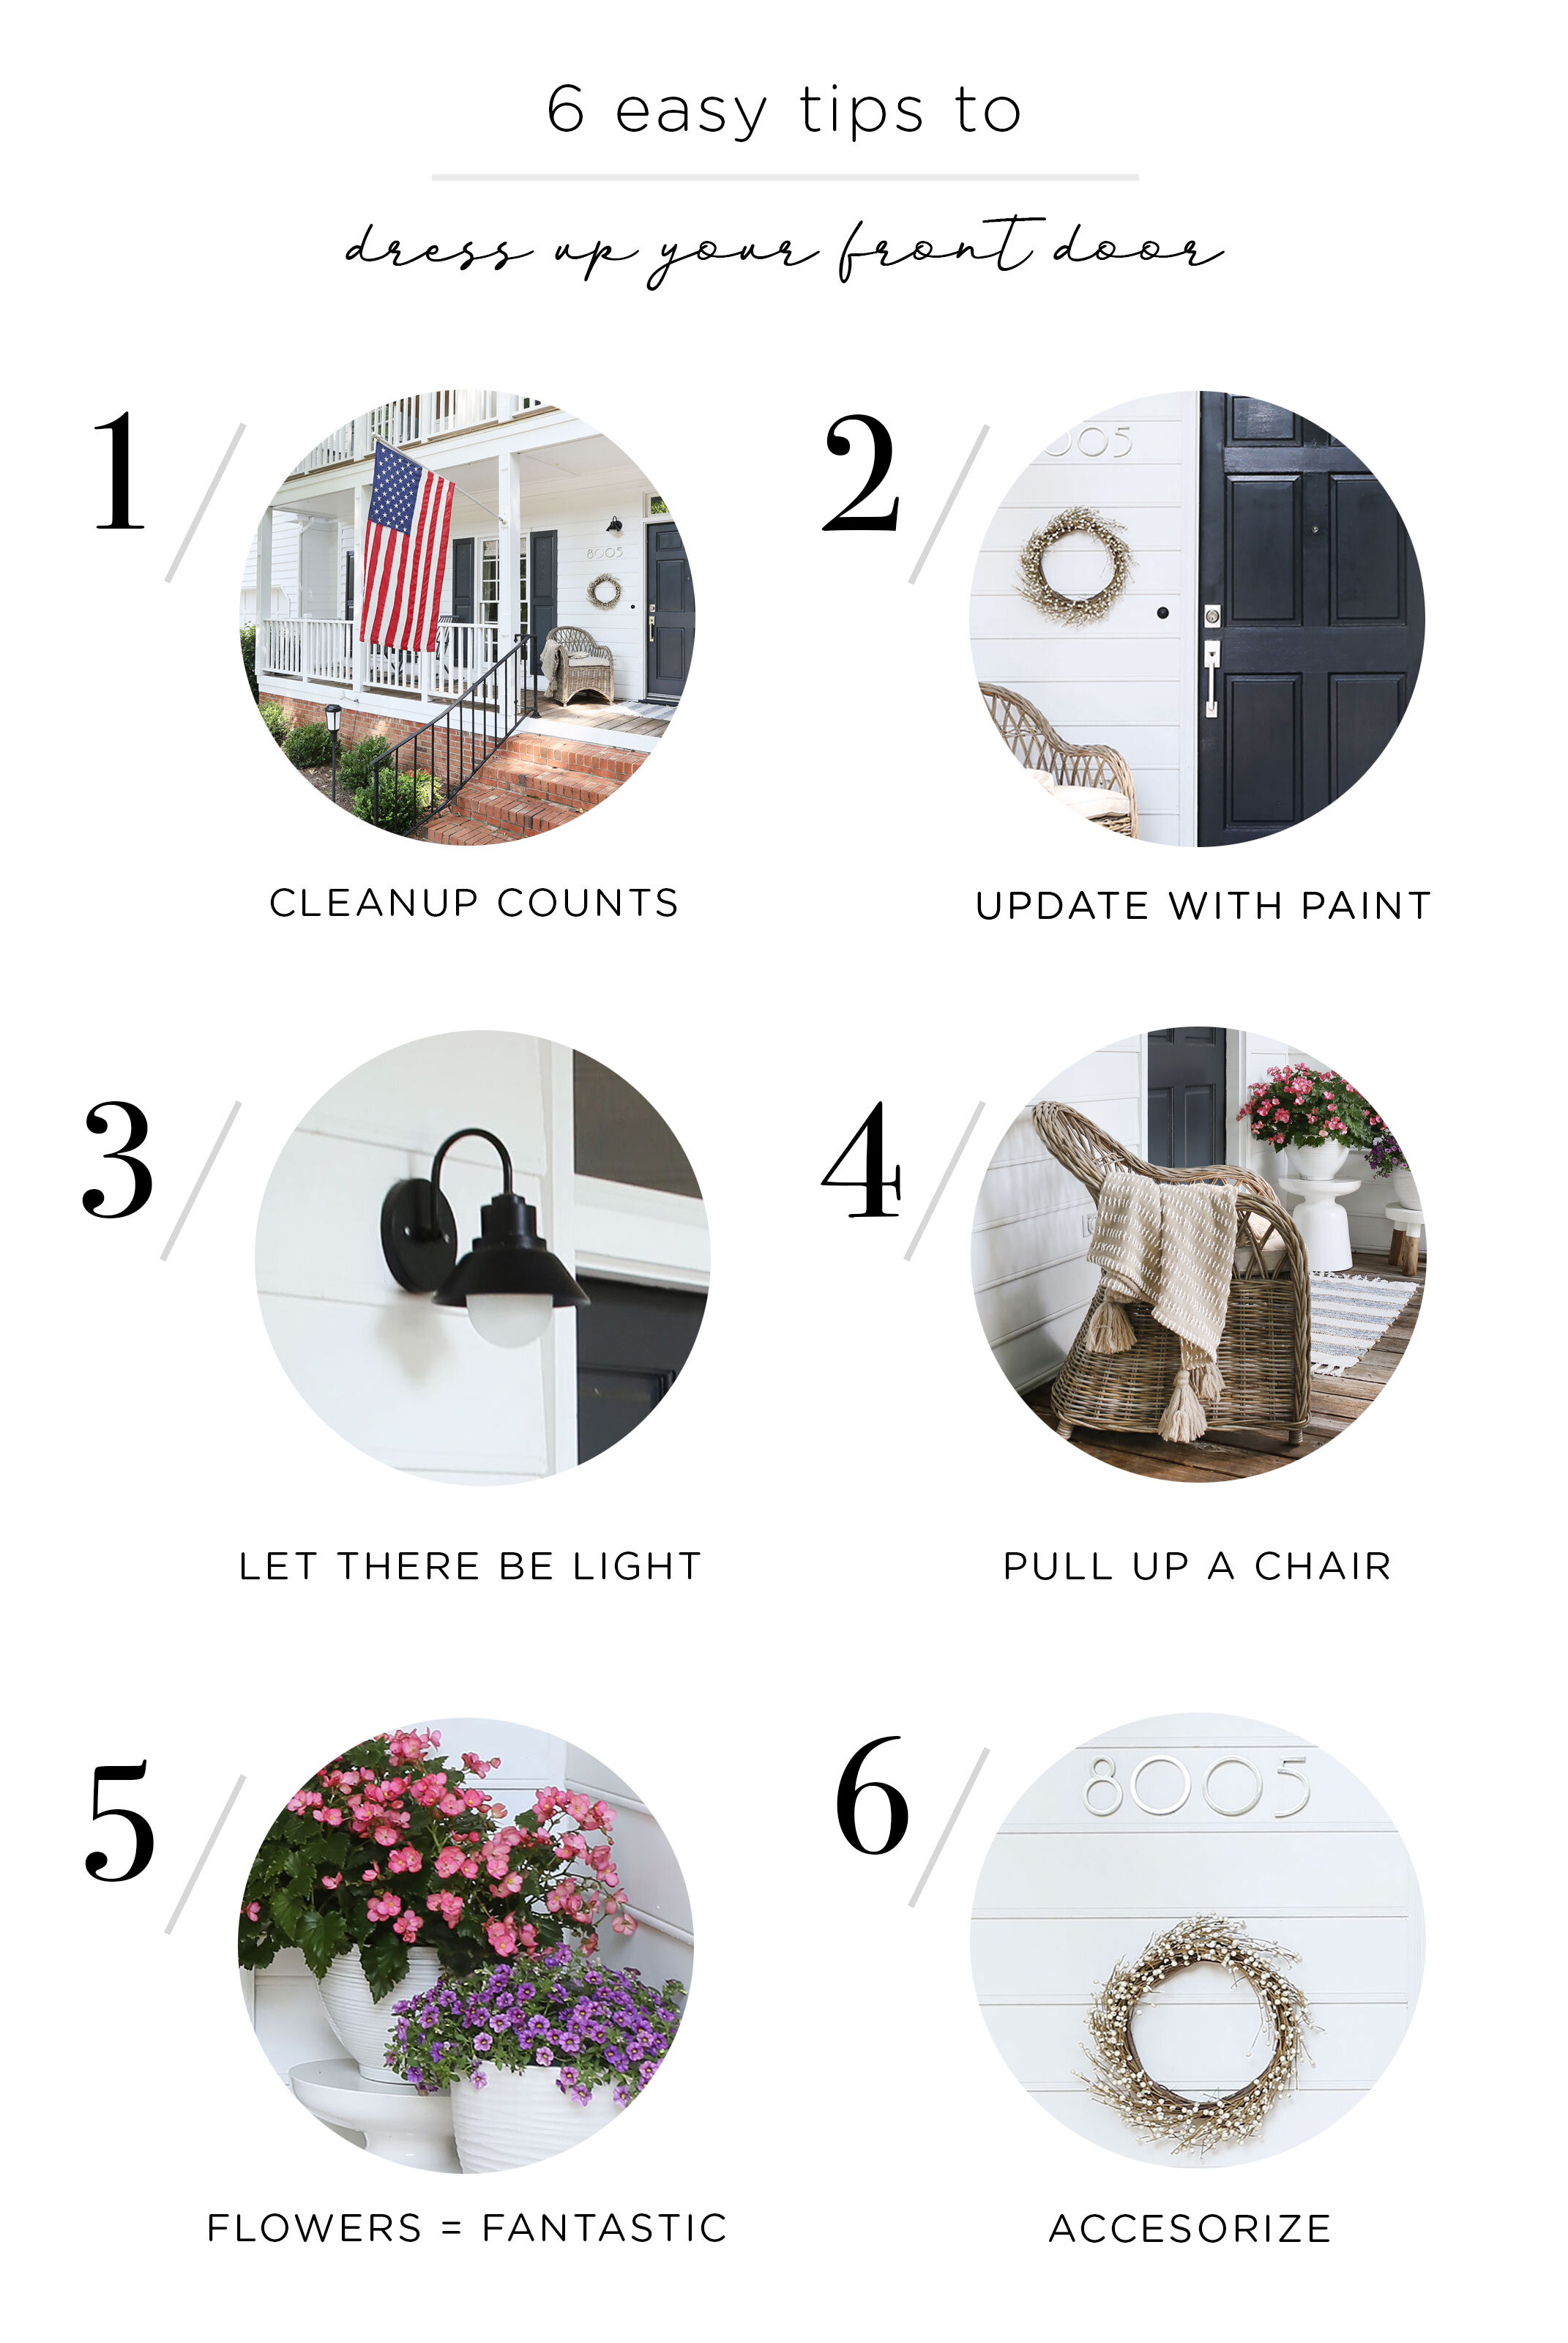 How to Dress Up Your Doorstep - The Scout Guide